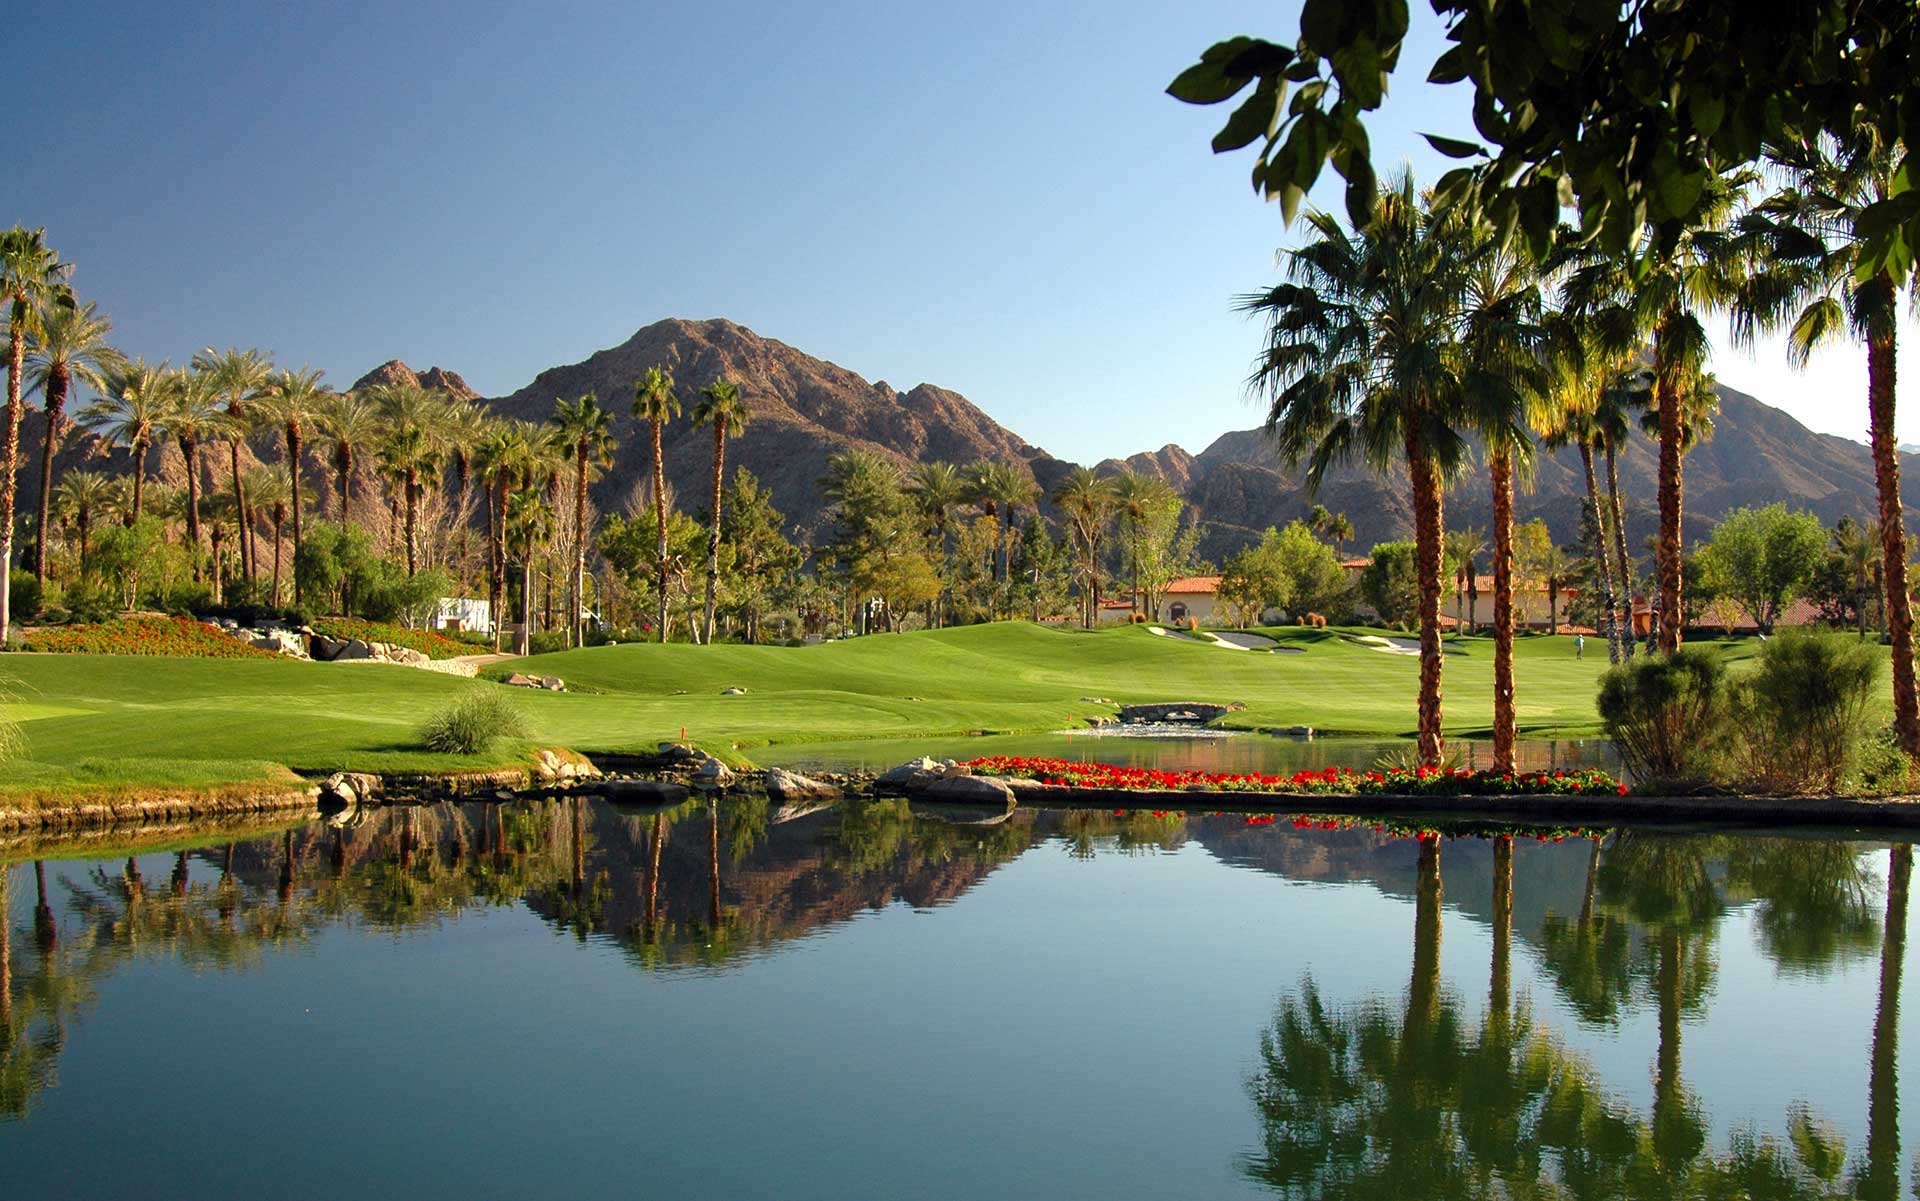 palm springs vacation rentals